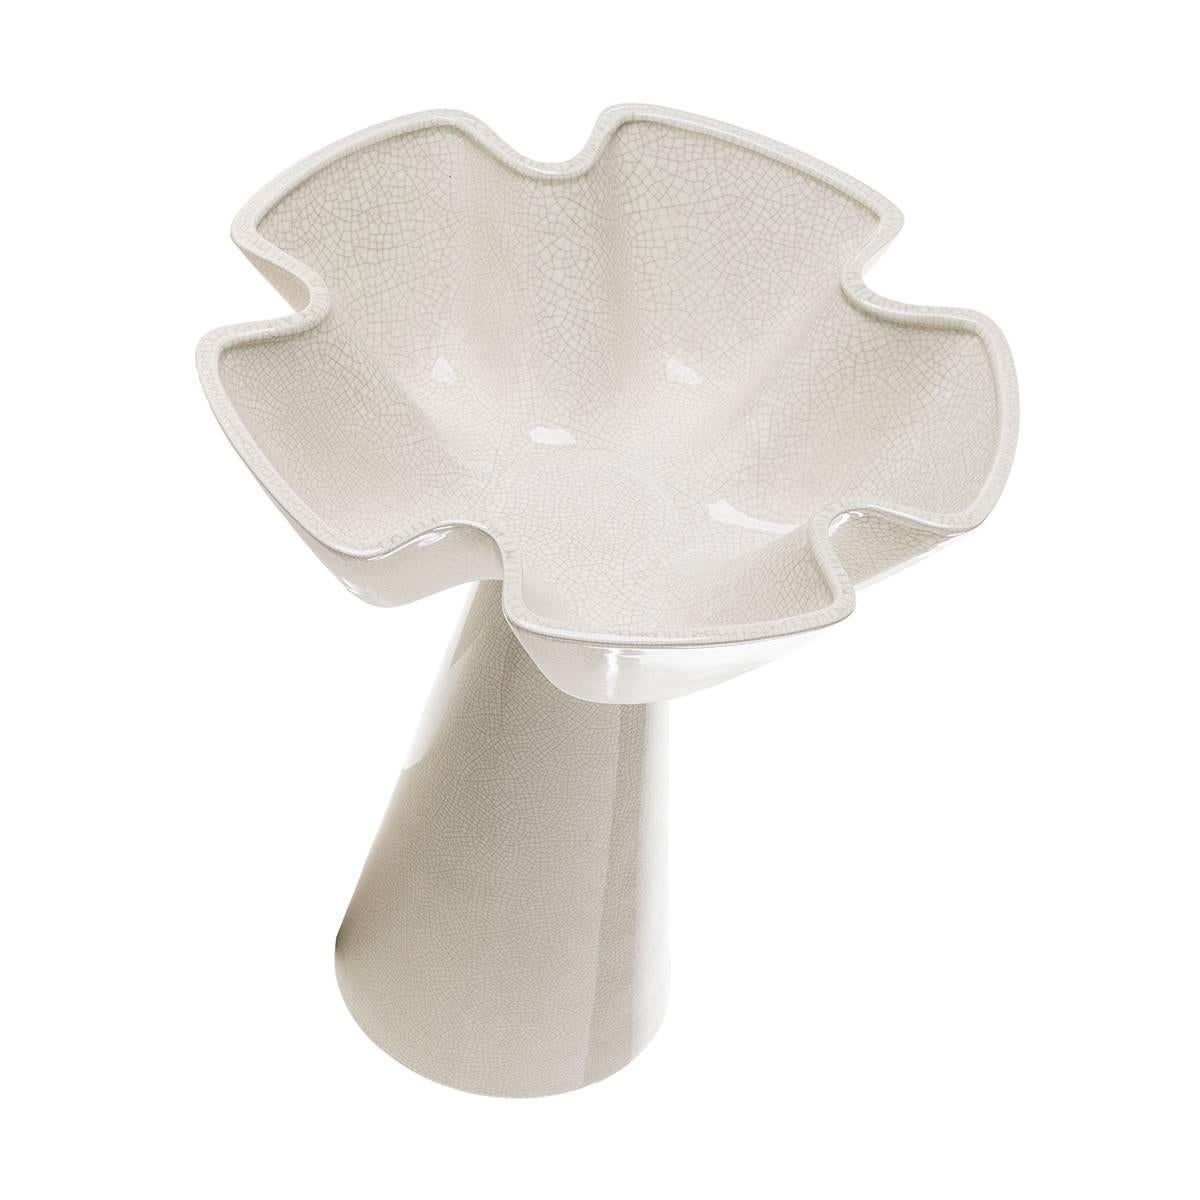 Pair of ceramic floral-shaped centerpieces.
These centerpieces are featured by an off-white crackled glaze hue and from a floral steam raising its petals to sky. A skillfully handcrafted creation for a fresh touch in any space.